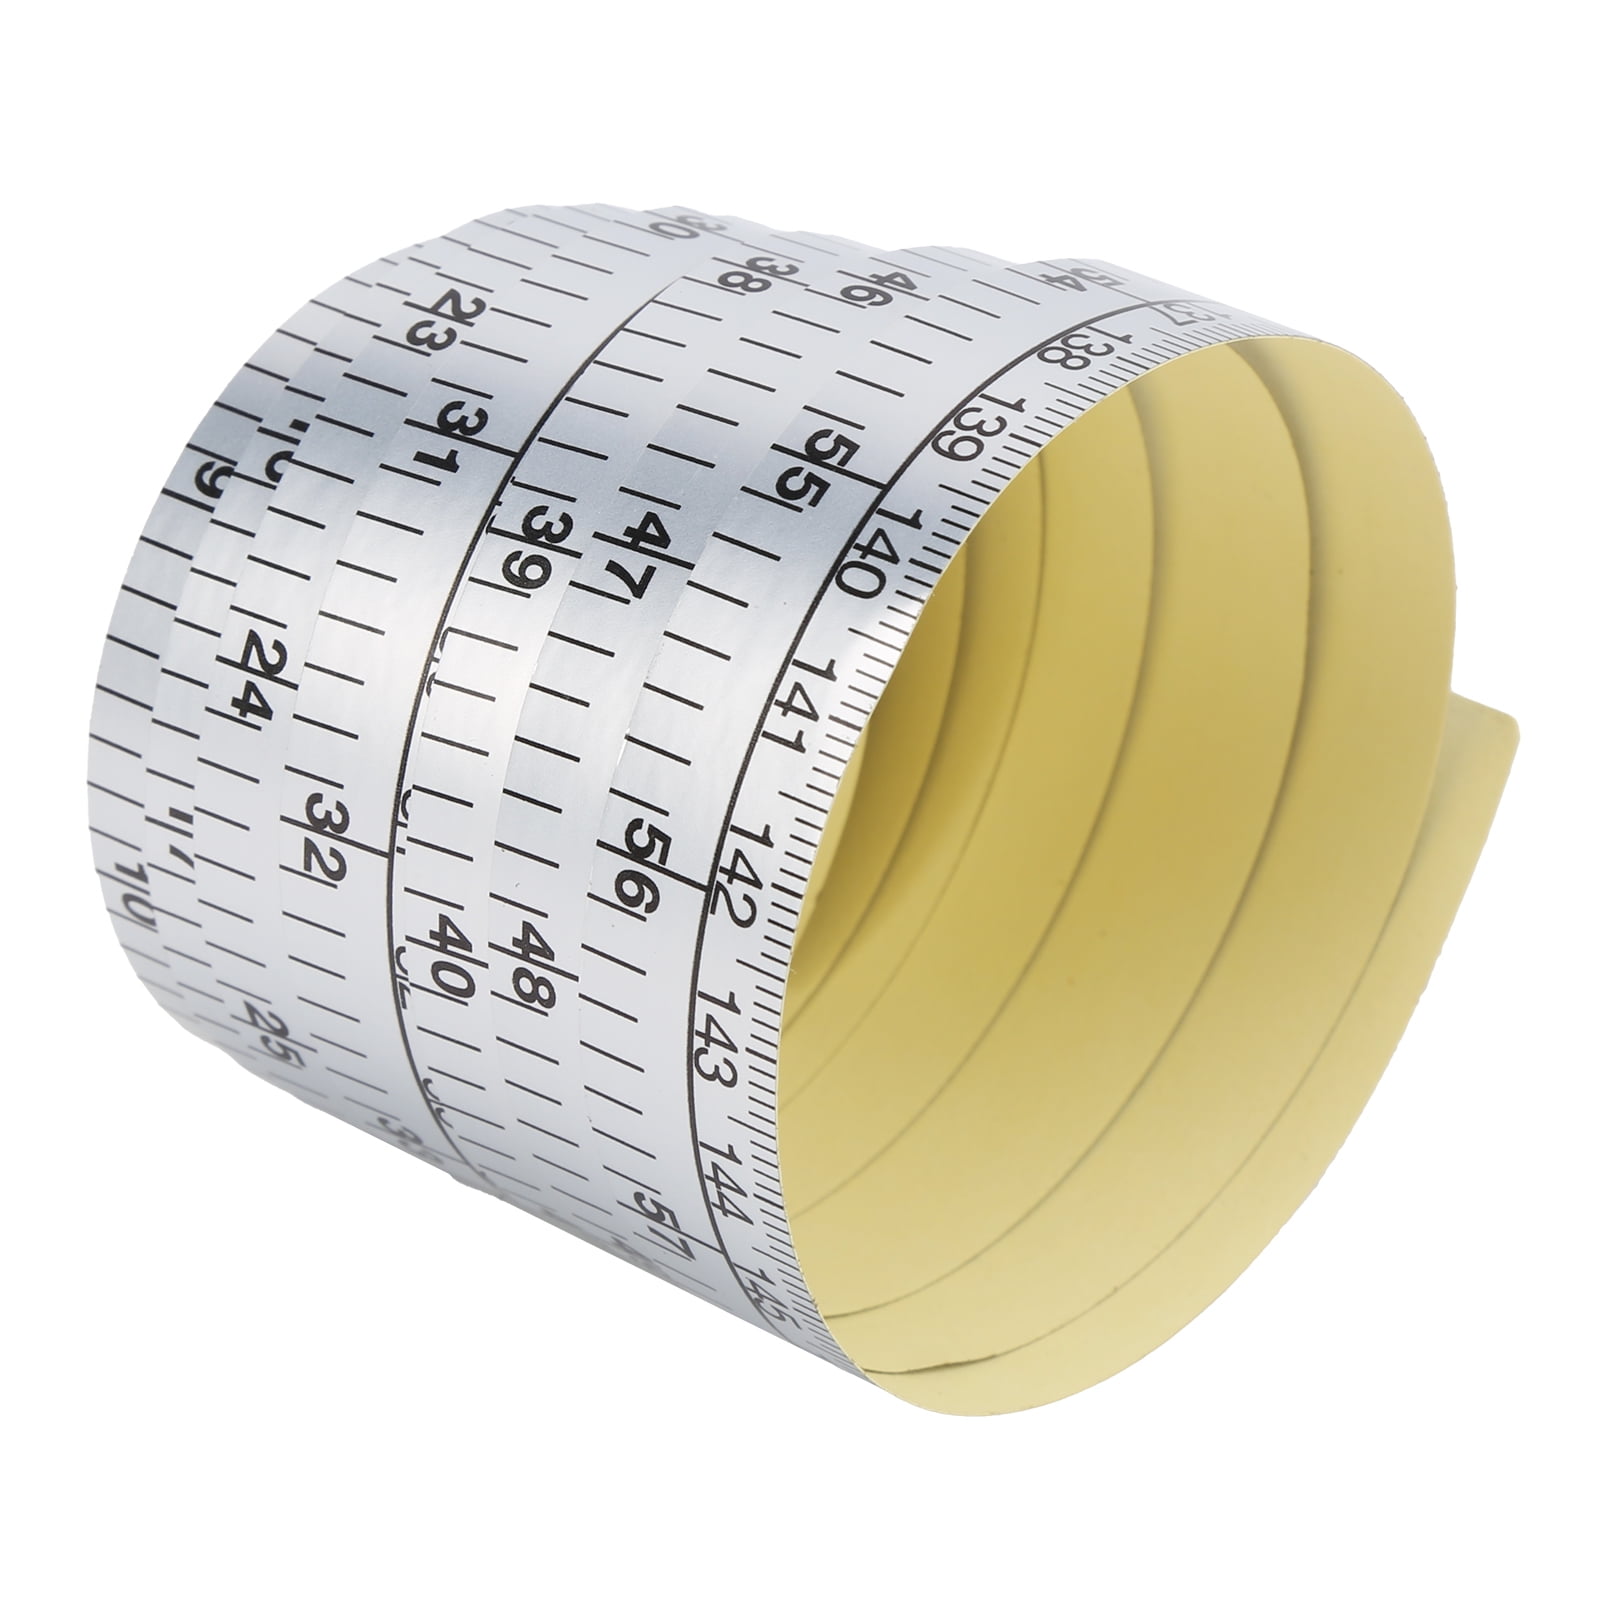 1m/2m Workbench Ruler Adhesive Tape Measure Inch & Metric Double Scale  Rust-Proof Rule Self-Adhesive Measuring Tape M4YD - AliExpress